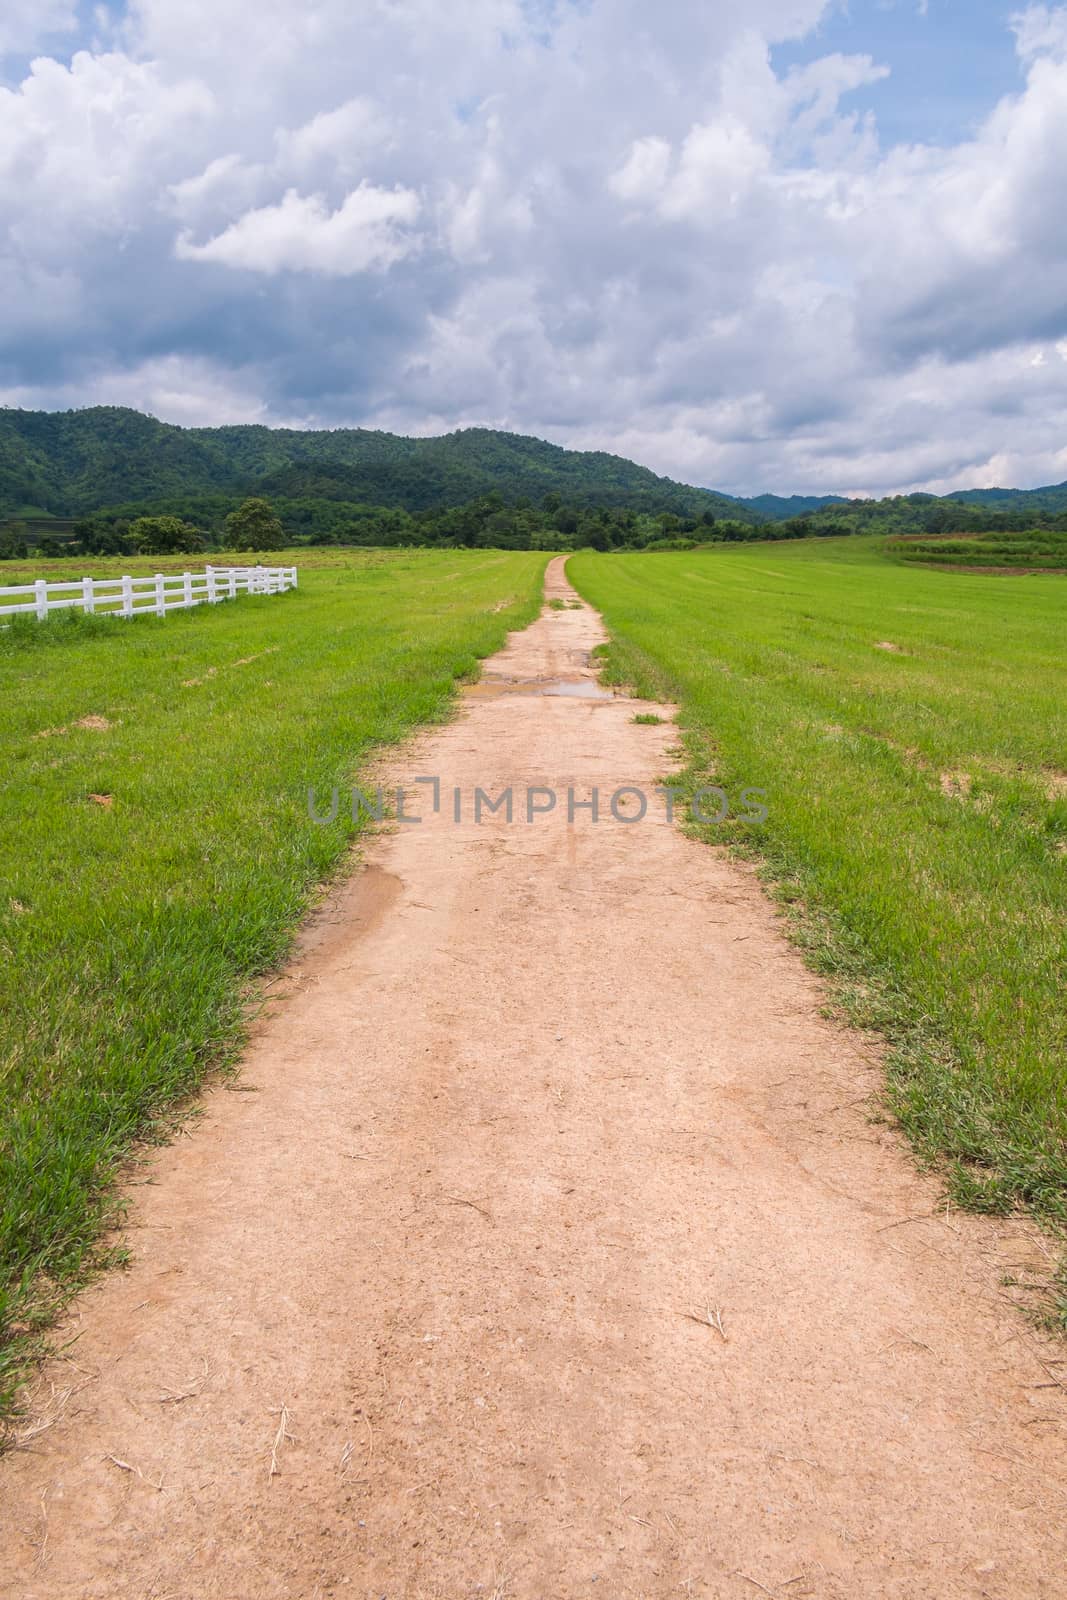 road in farm field with cloudy by moggara12